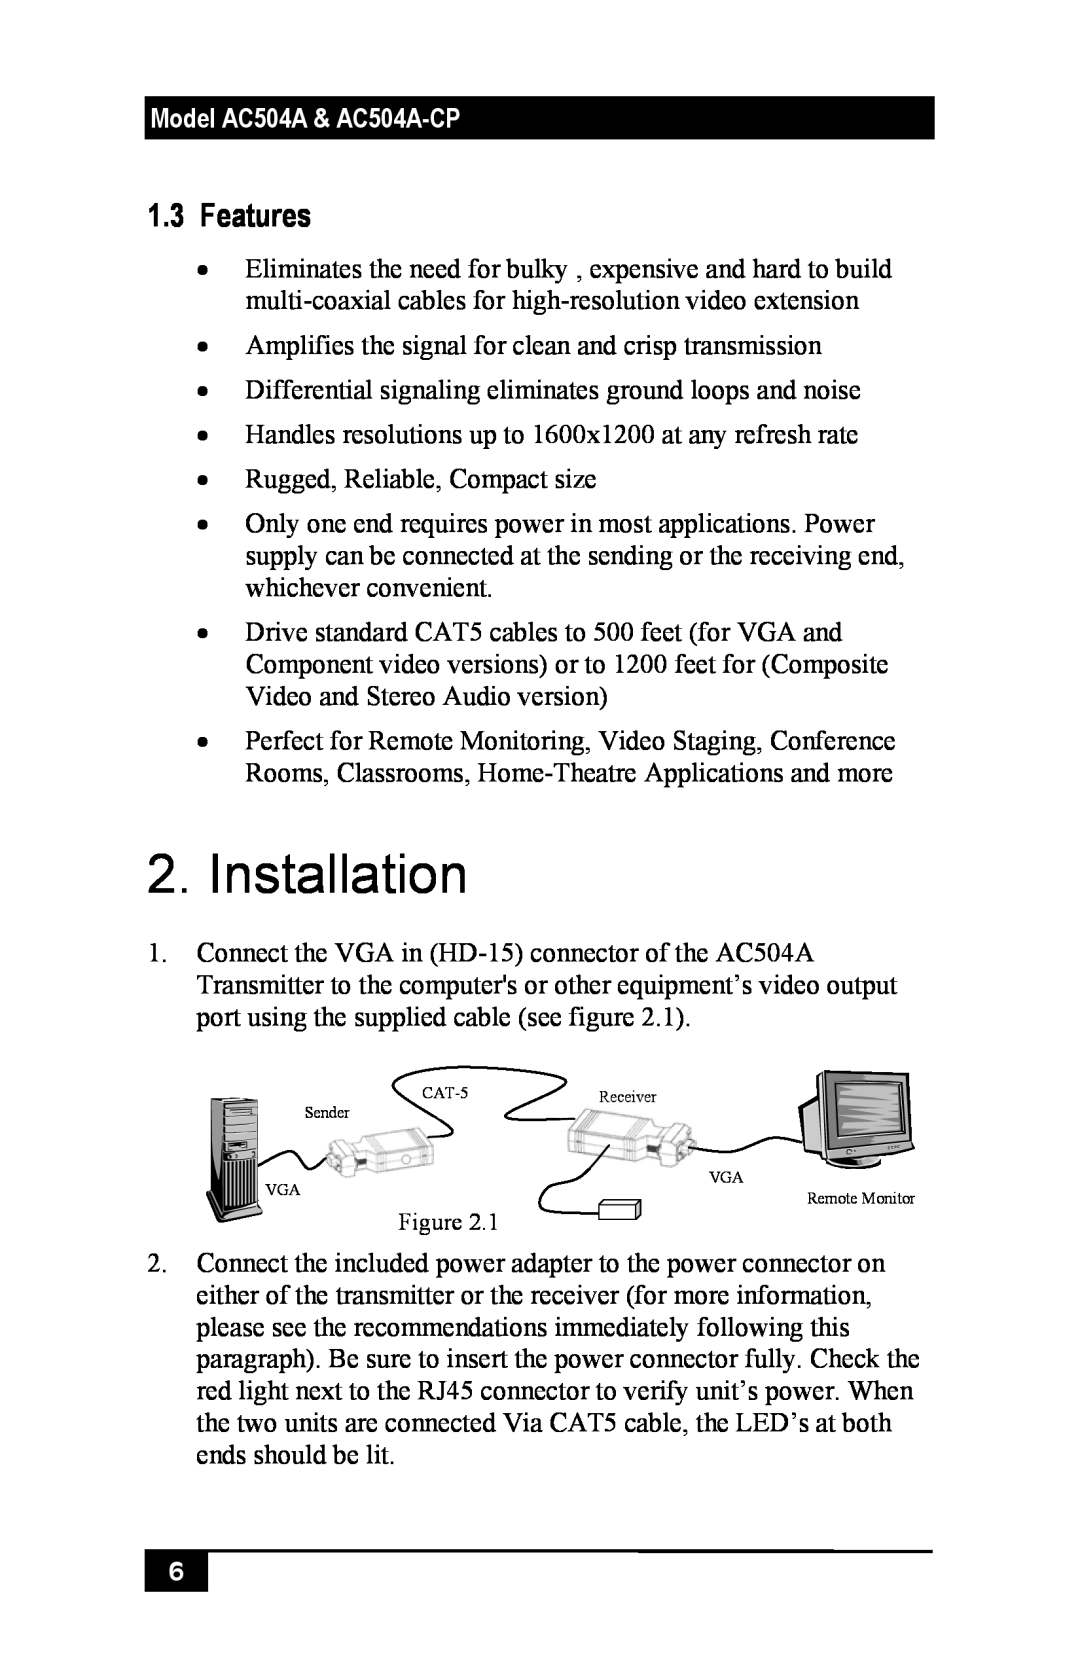 Black Box Mini-CAT5 Video-over-CAT5 Extension manual Installation, Features, Model AC504A & AC504A-CP 